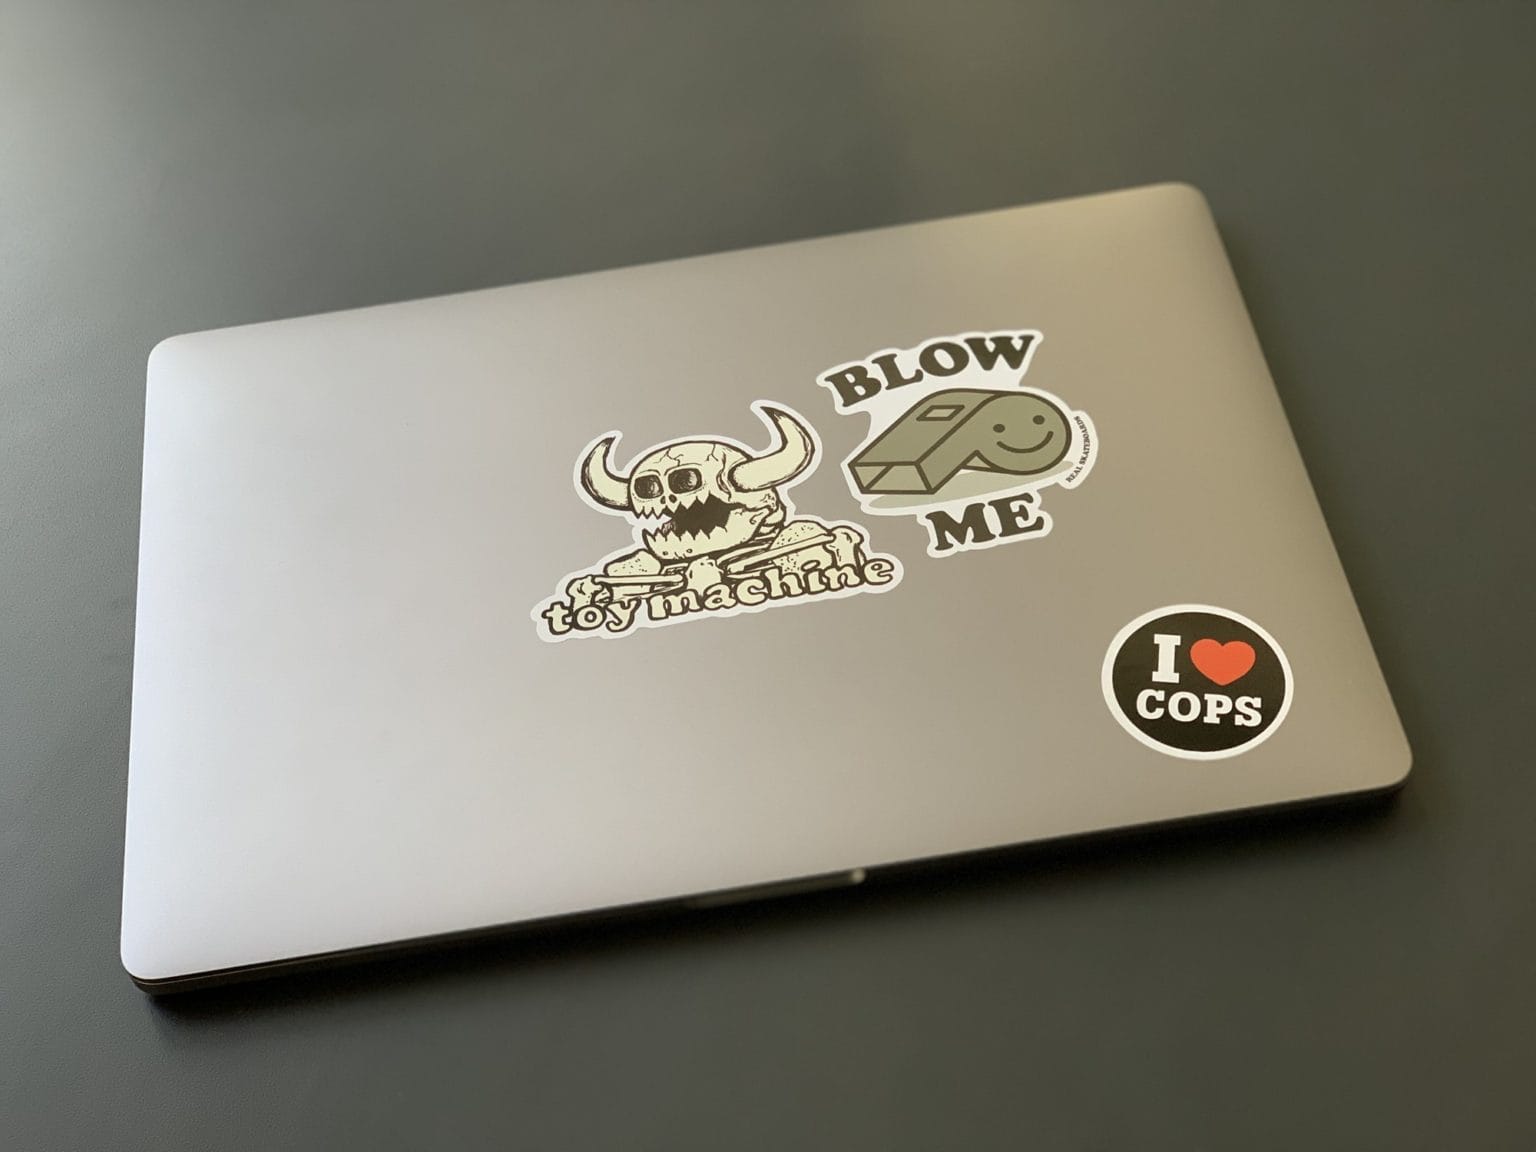 It takes years of professional training to place MacBook stickers this badly.